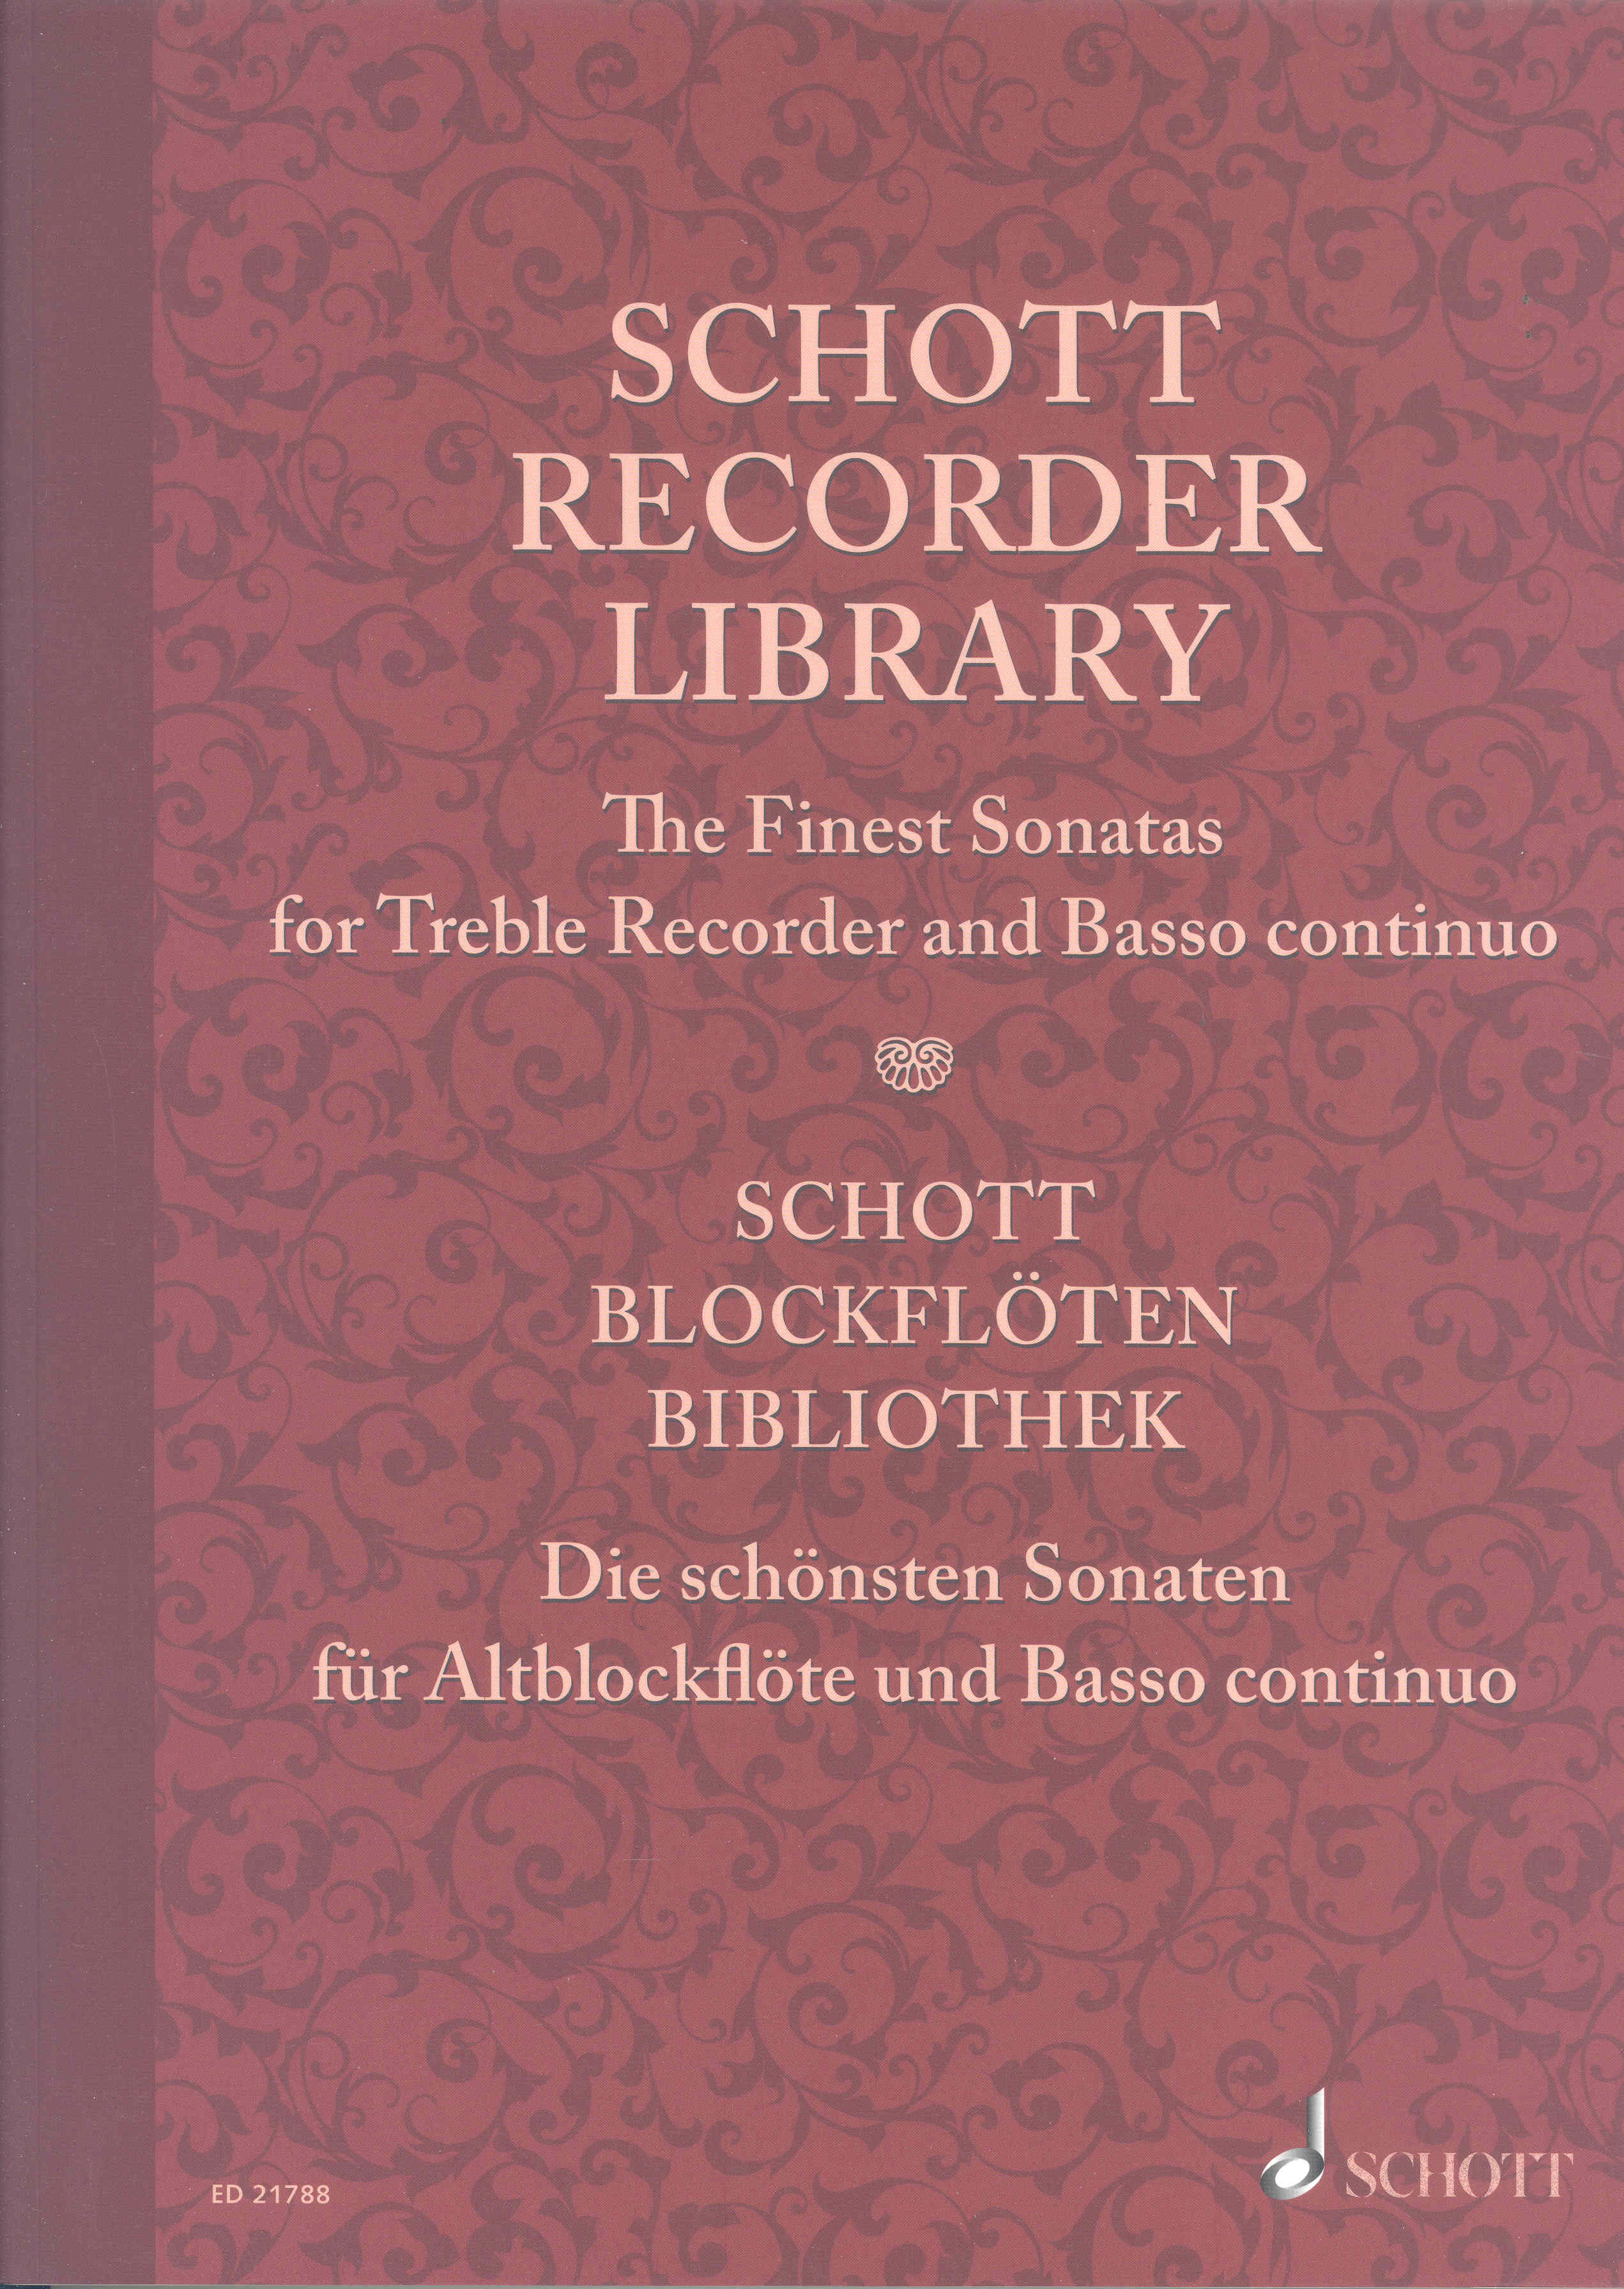 Schott Recorder Library Collection Of Sonatas Sheet Music Songbook